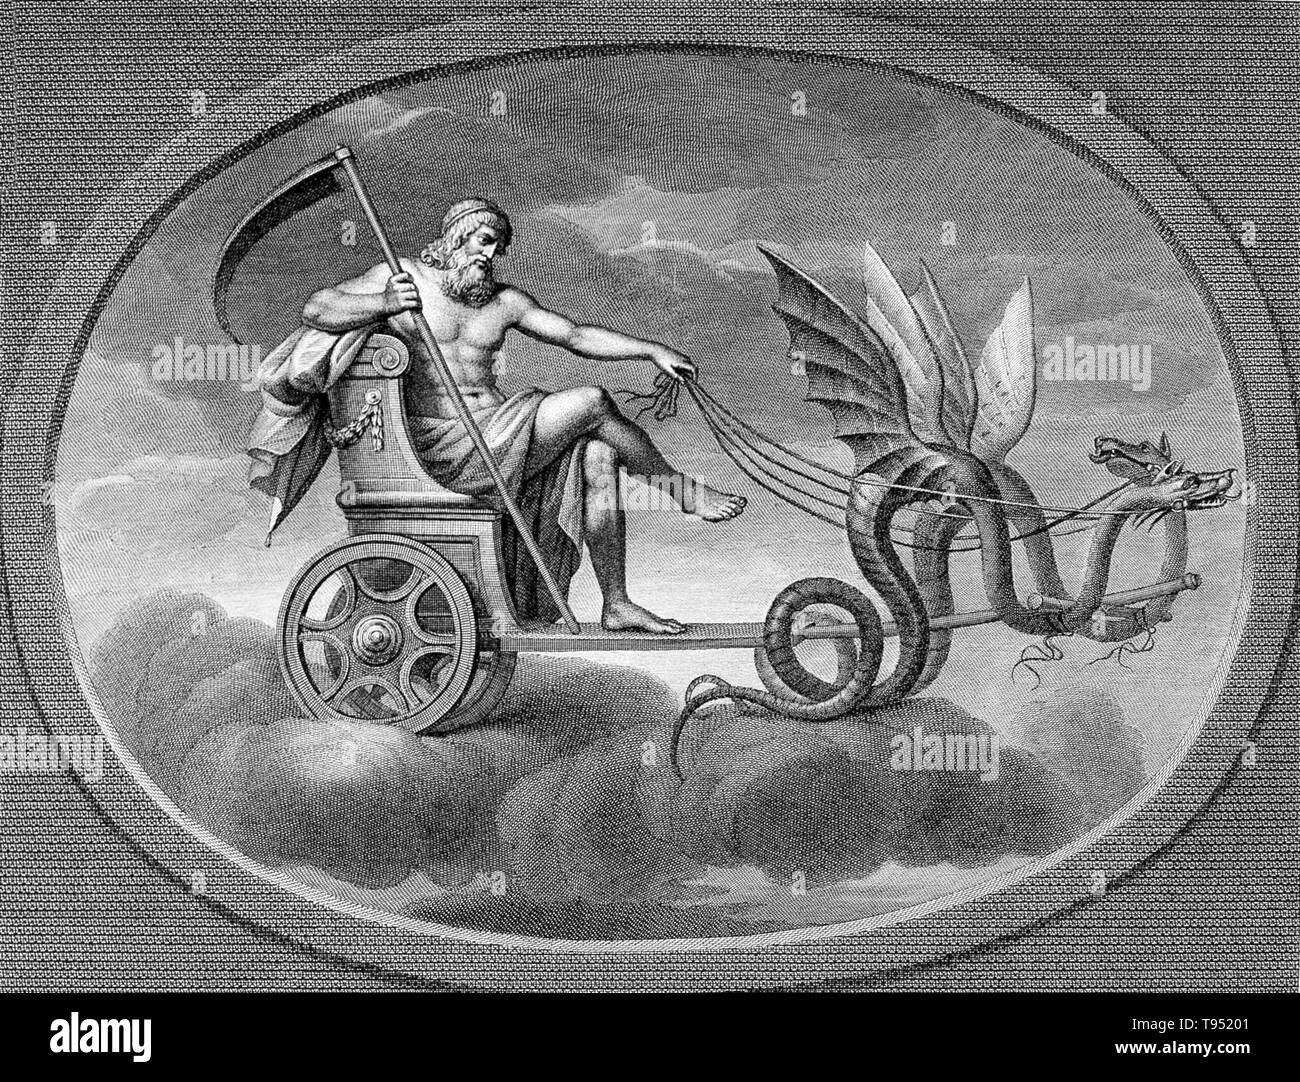 Saturn with his scythe, riding in his chariot. Saturn was a god in ancient Roman religion and a character in myth. He was the first god of the Capitol, known since the most ancient times as Saturnius Mons, and was seen as a god of generation, dissolution, plenty, wealth, agriculture, periodical renewal and liberation. In later developments he came to be also a god of time. His reign was depicted as a Golden Age of plenty and peace. Stock Photo